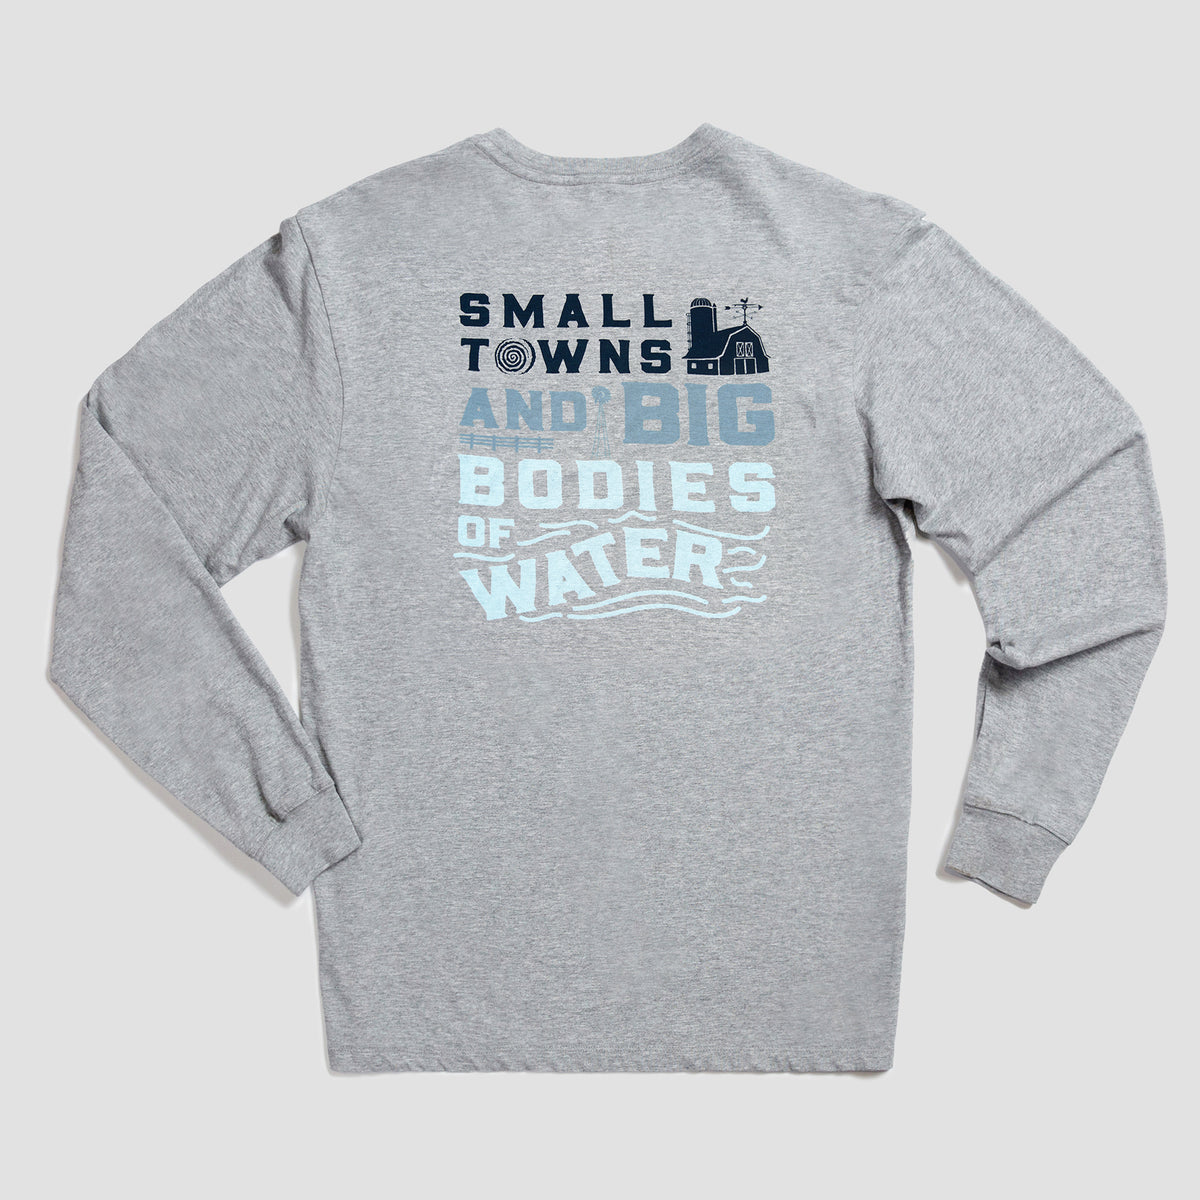 Small Towns &amp; Big Bodies of Water Long Sleeve Tee Shirt